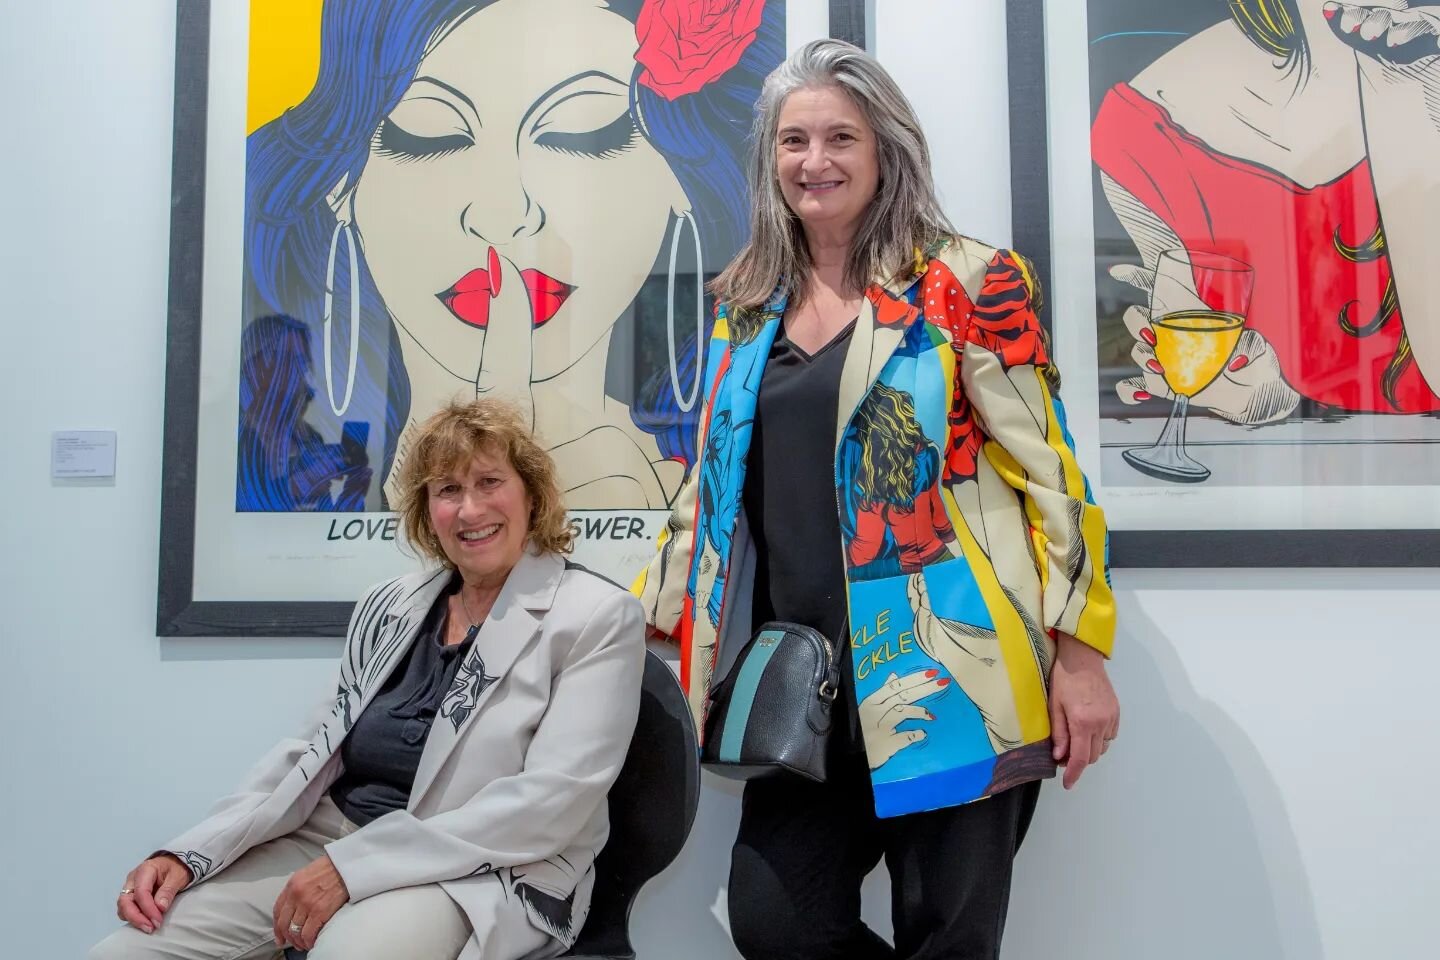 💙💙💙

Regram @cynthiacorbettgallery

During the Collectors' Preview @britishartfair we had the honor and pleasure of hosting two esteemed guests. 

💫 The first is the renowned artist @DeborahAzzopardi, a prominent figure in British Pop Art, known 